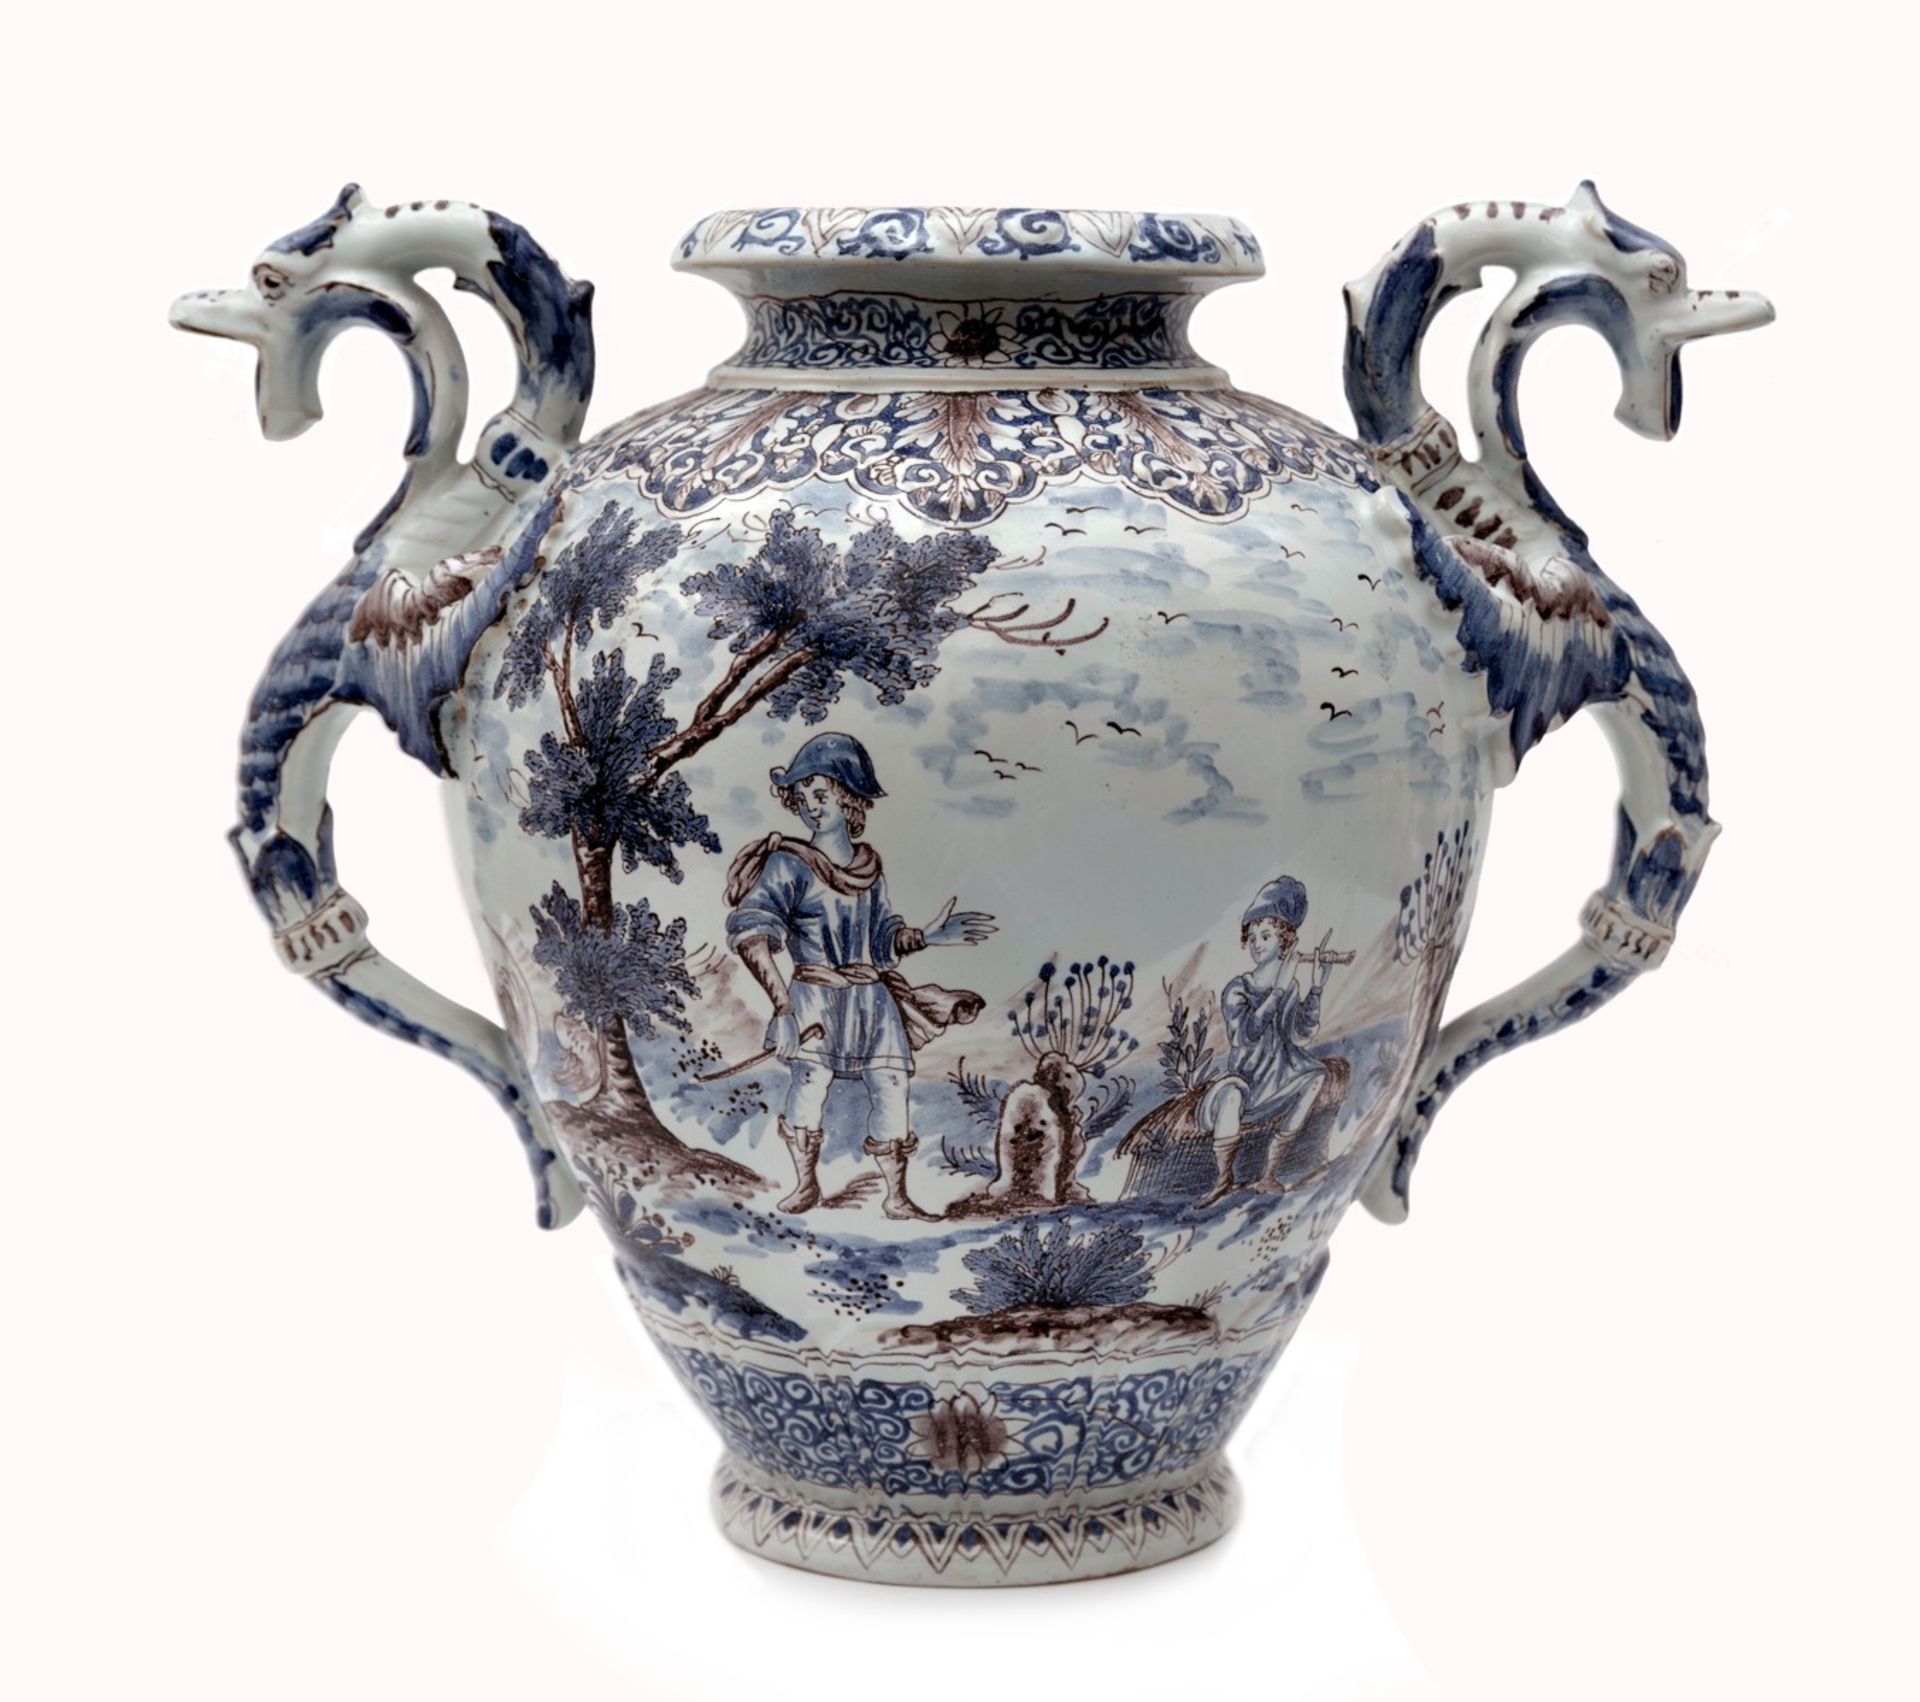 A Nevers-Style Faience Vase